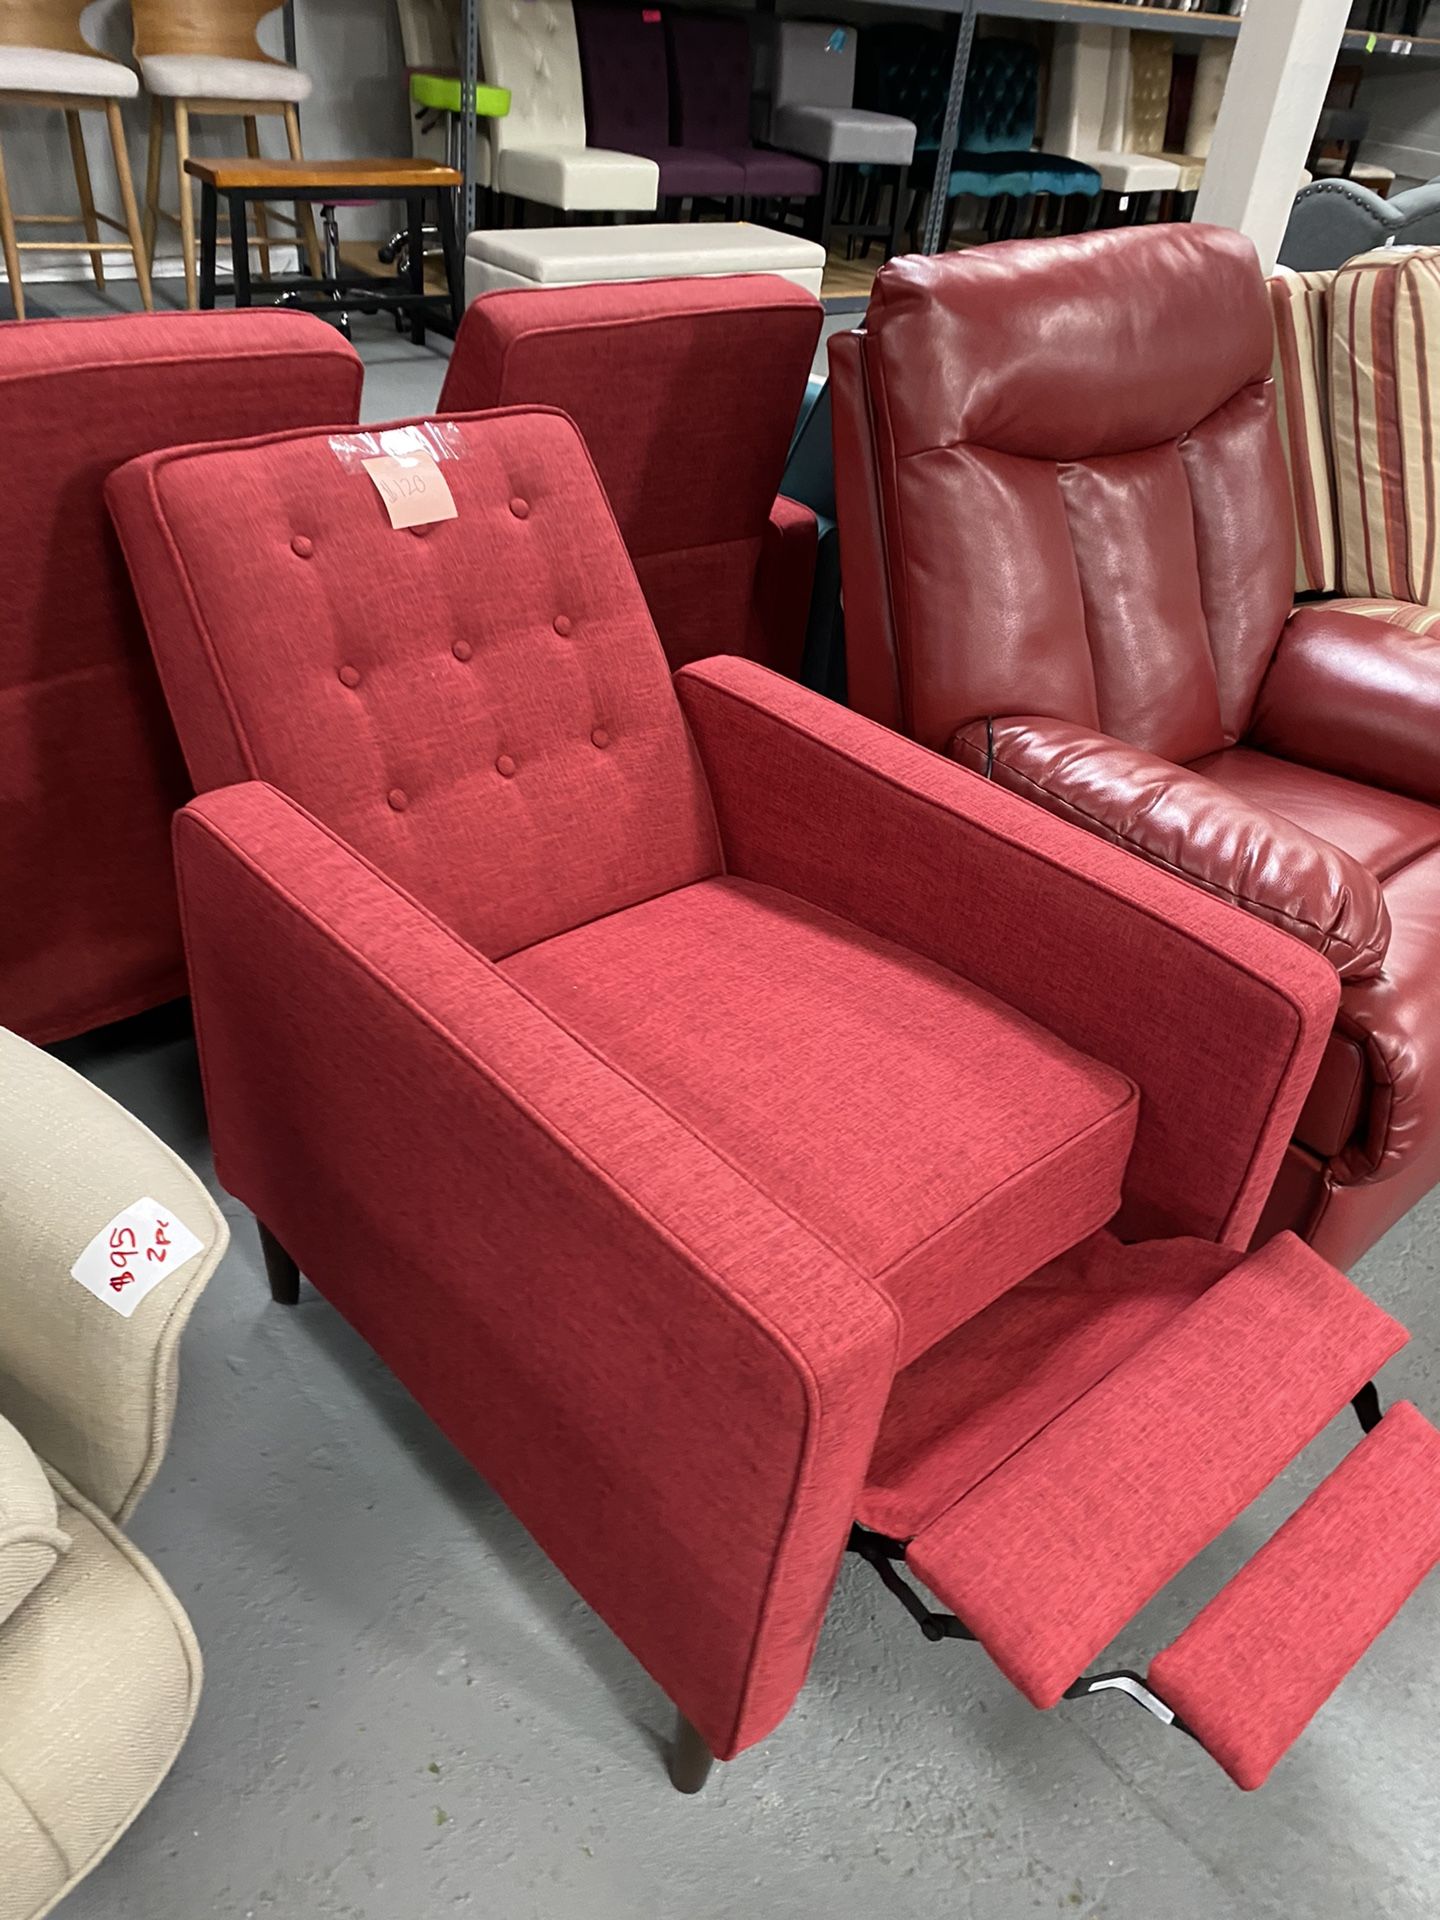 Red sofa chair recliner